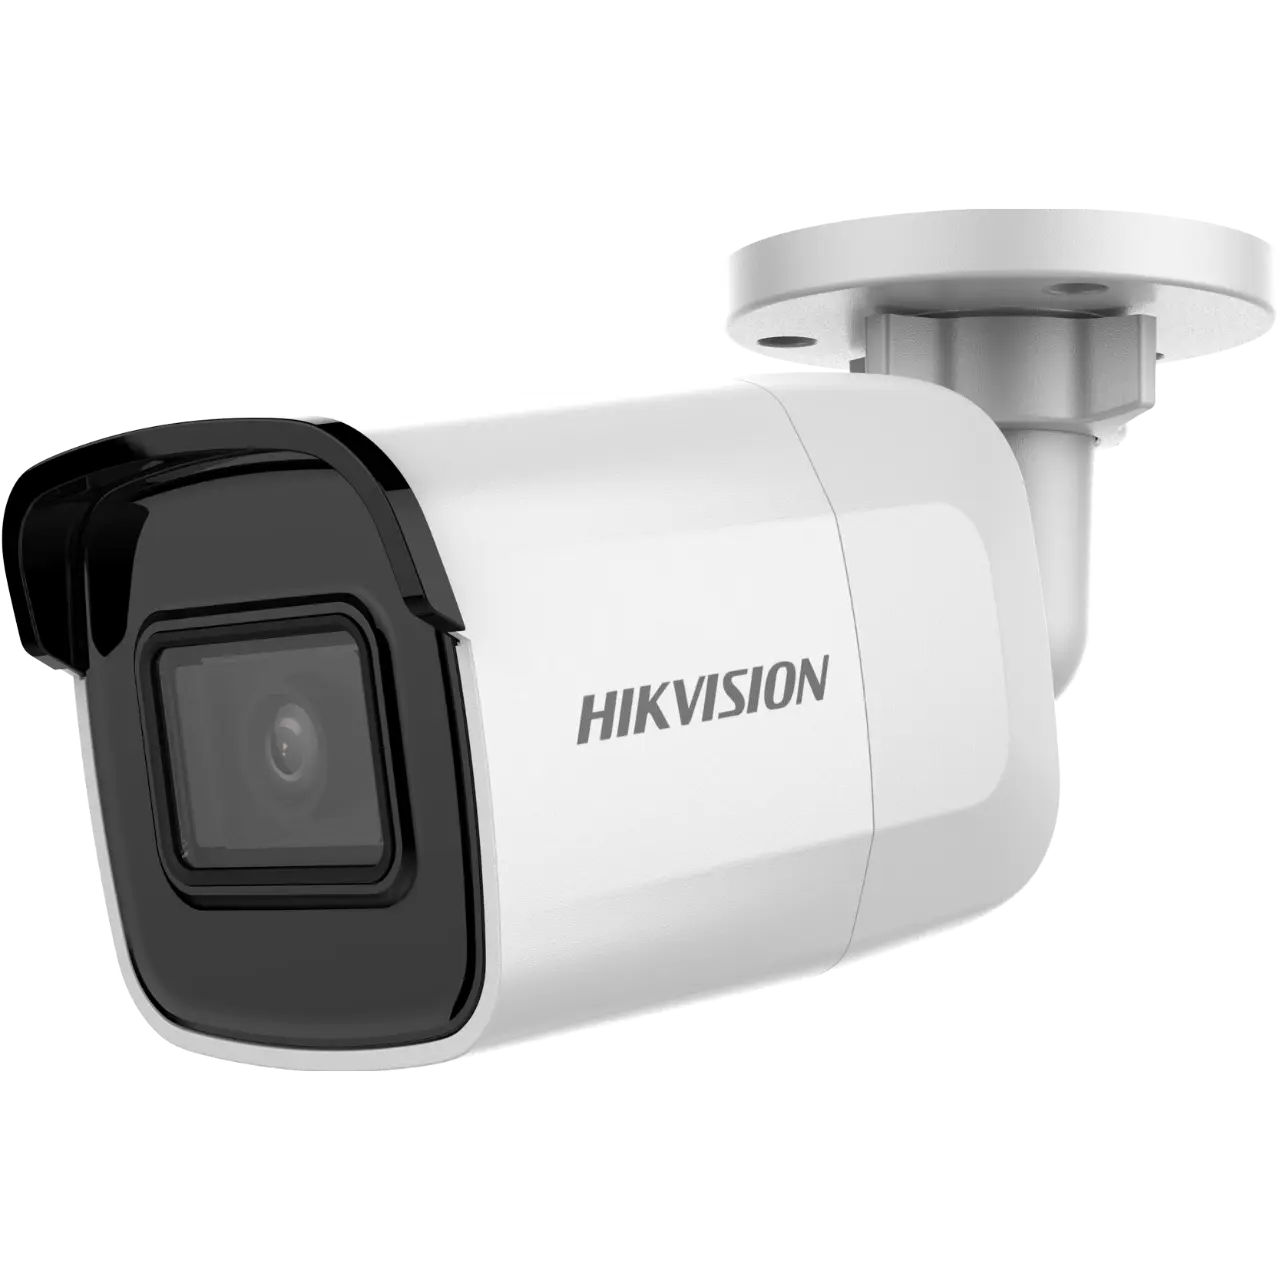 HIKVISION 2 MP WDR FIXED MINI BULLET NETWORK CAMERA (DS-2CD2021G1-I 2.8MM B)